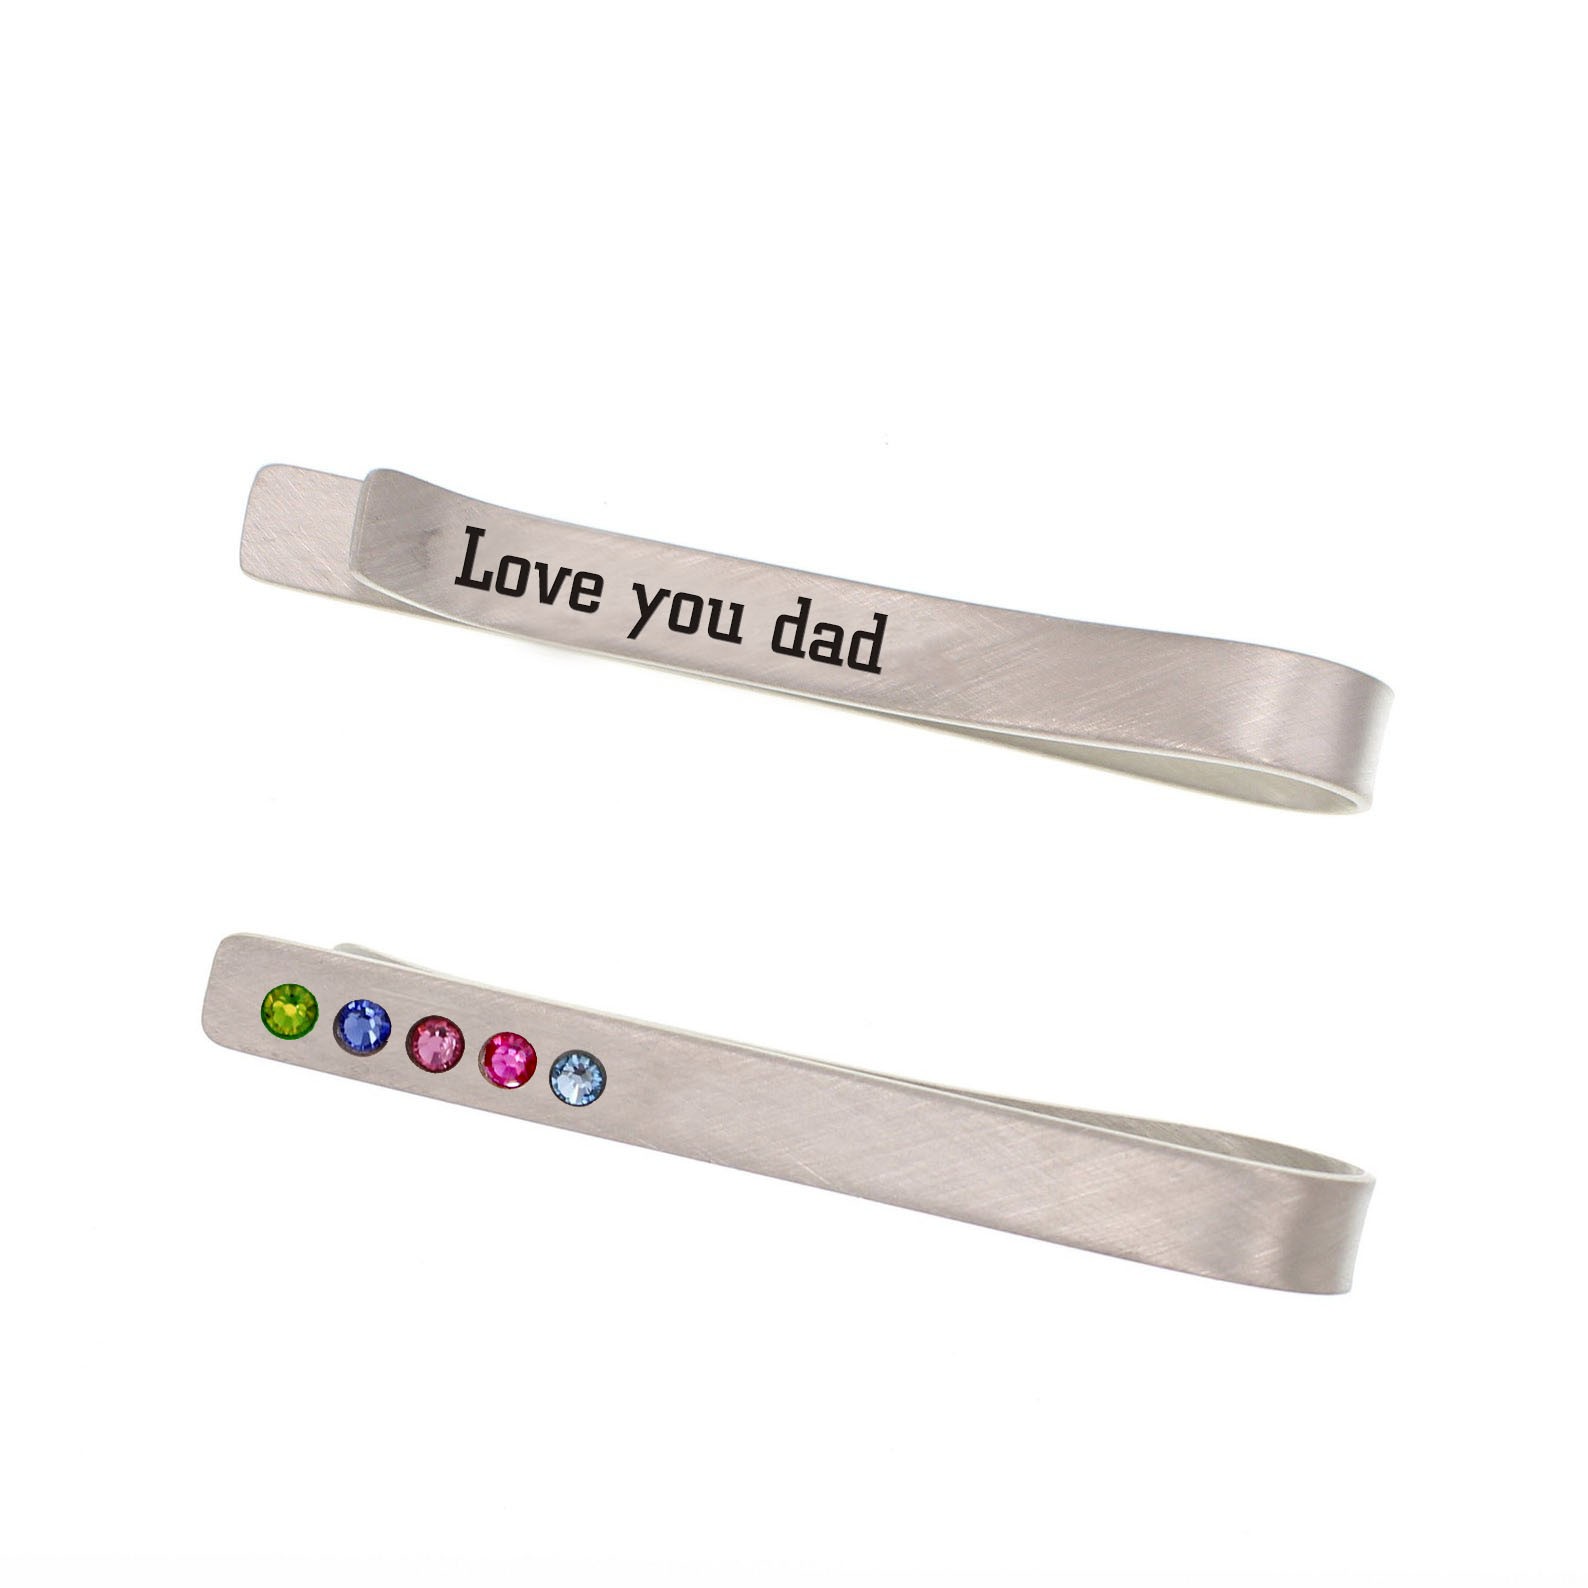 Personalized Men Name Engraved Tie Clips With Birthstone For Him Father's Day Gift